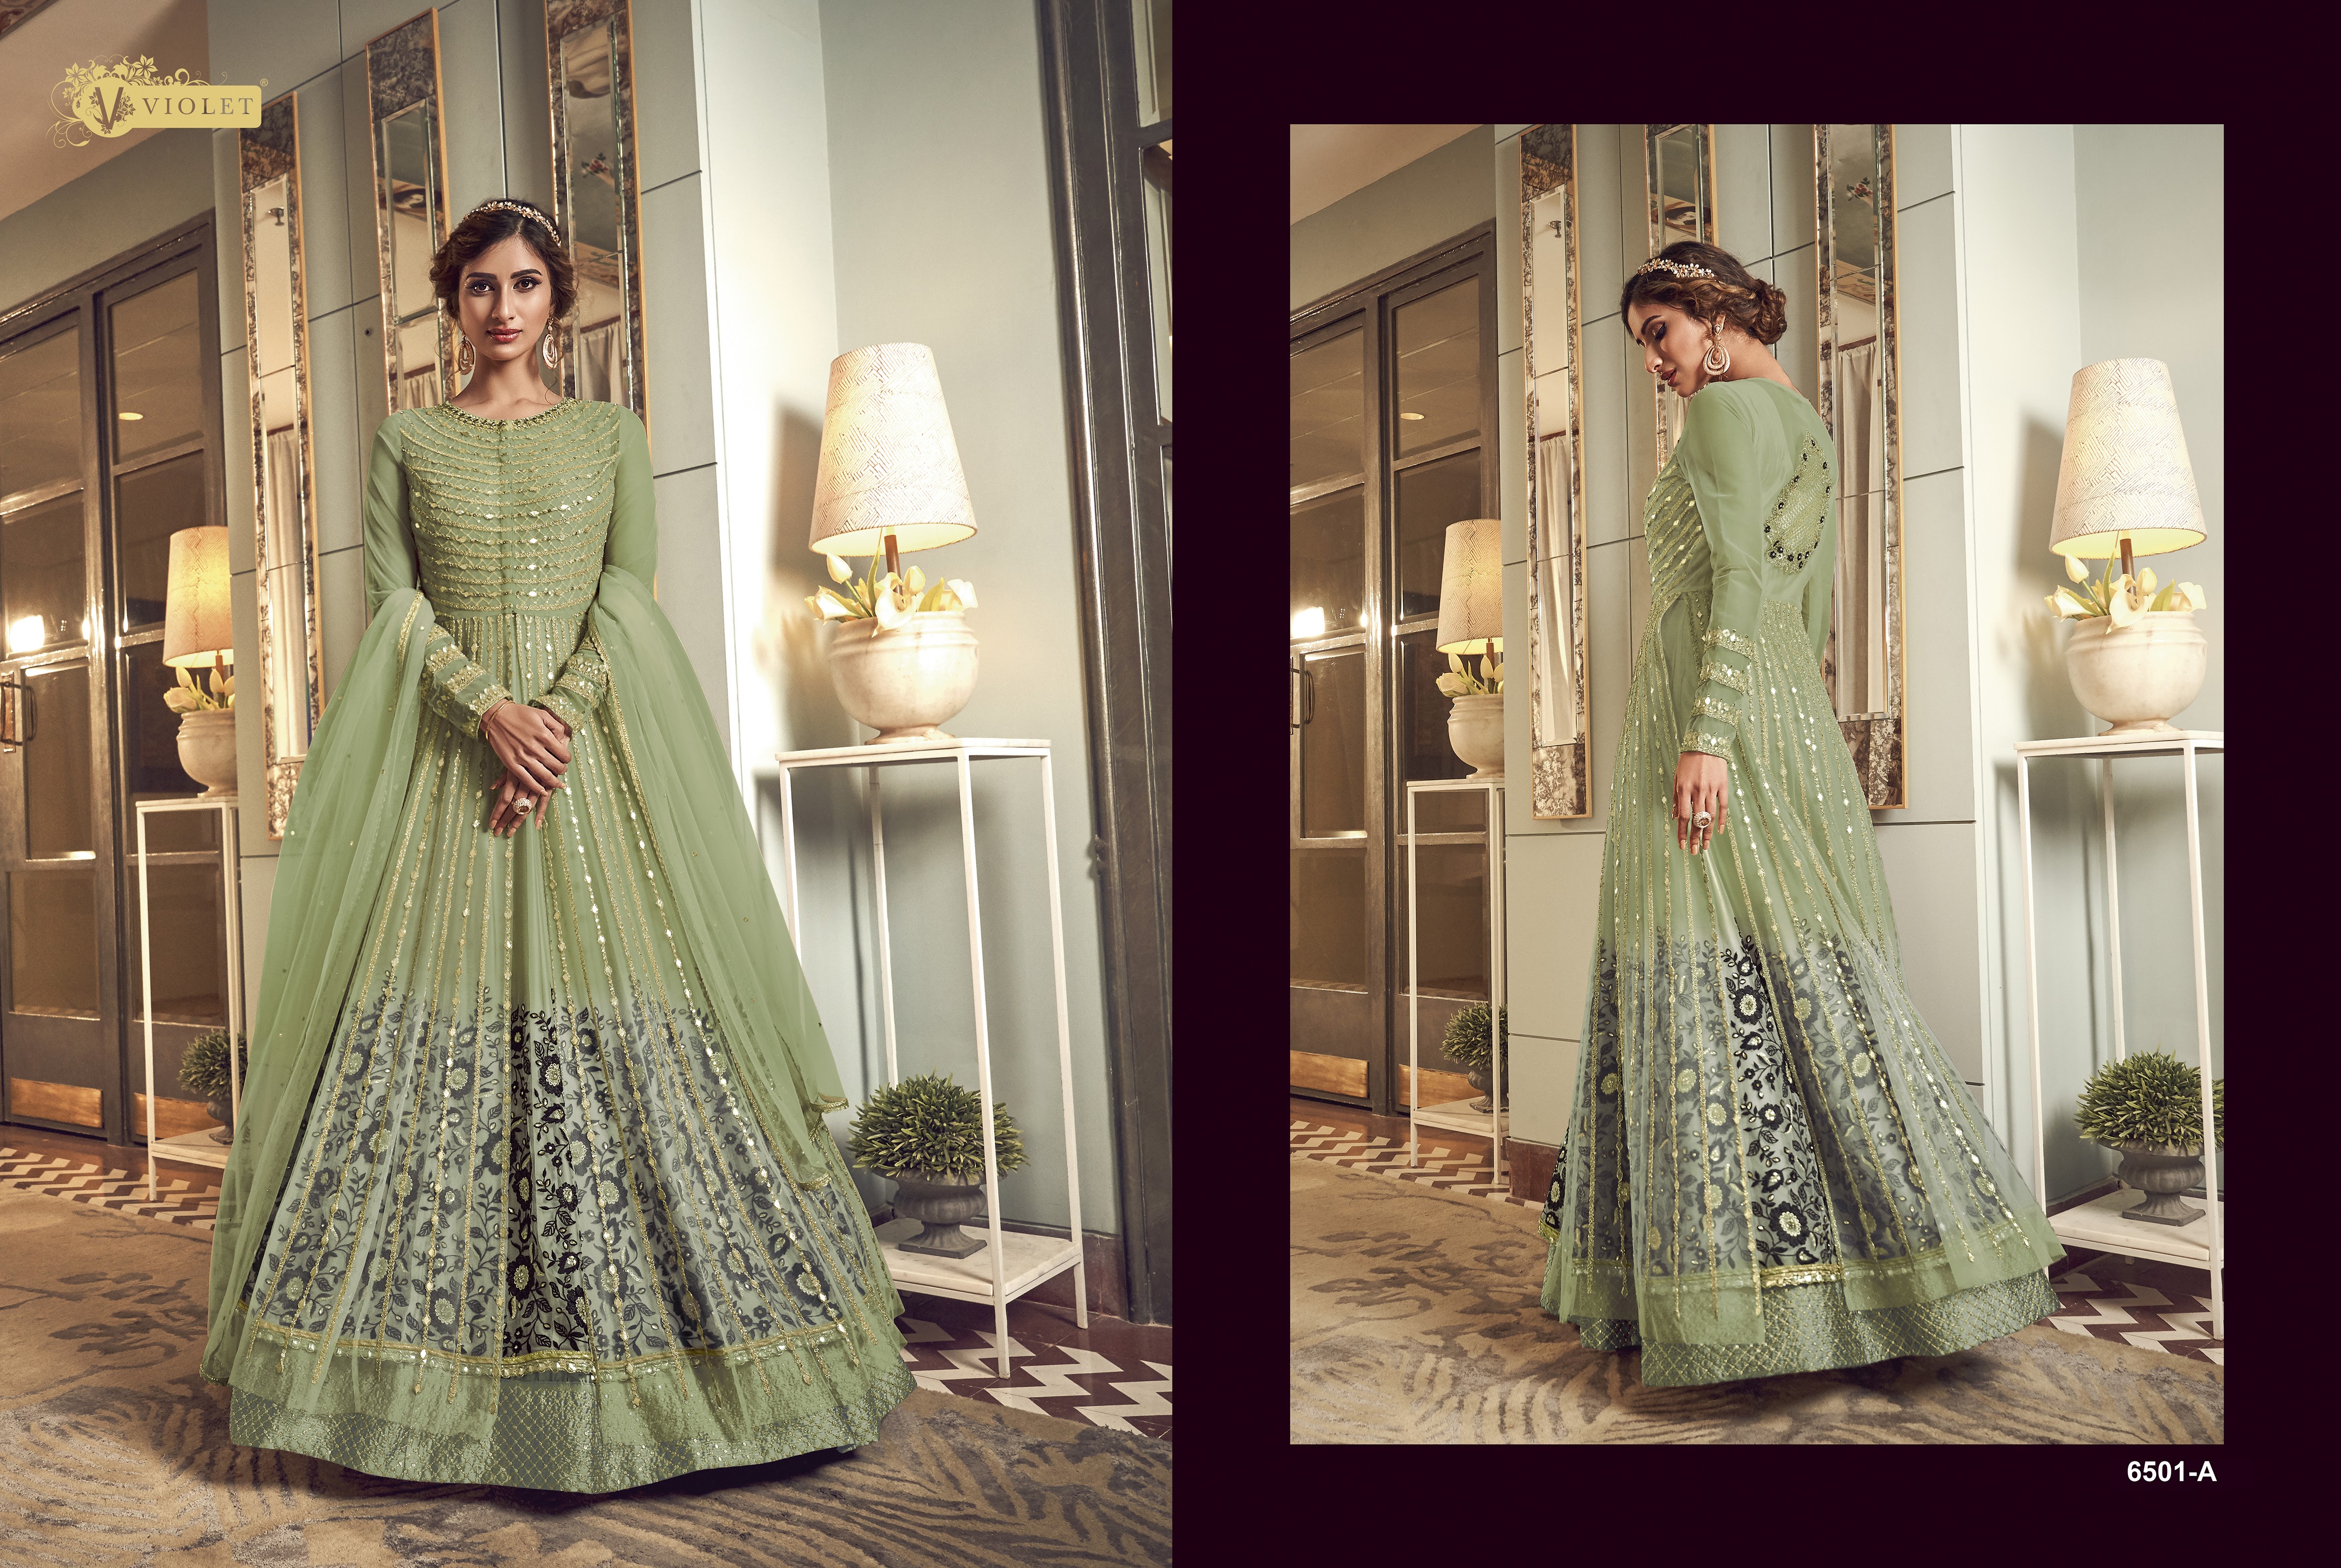 Mihika Bridals - Christian Bridal Gowns and Accessories | Anand